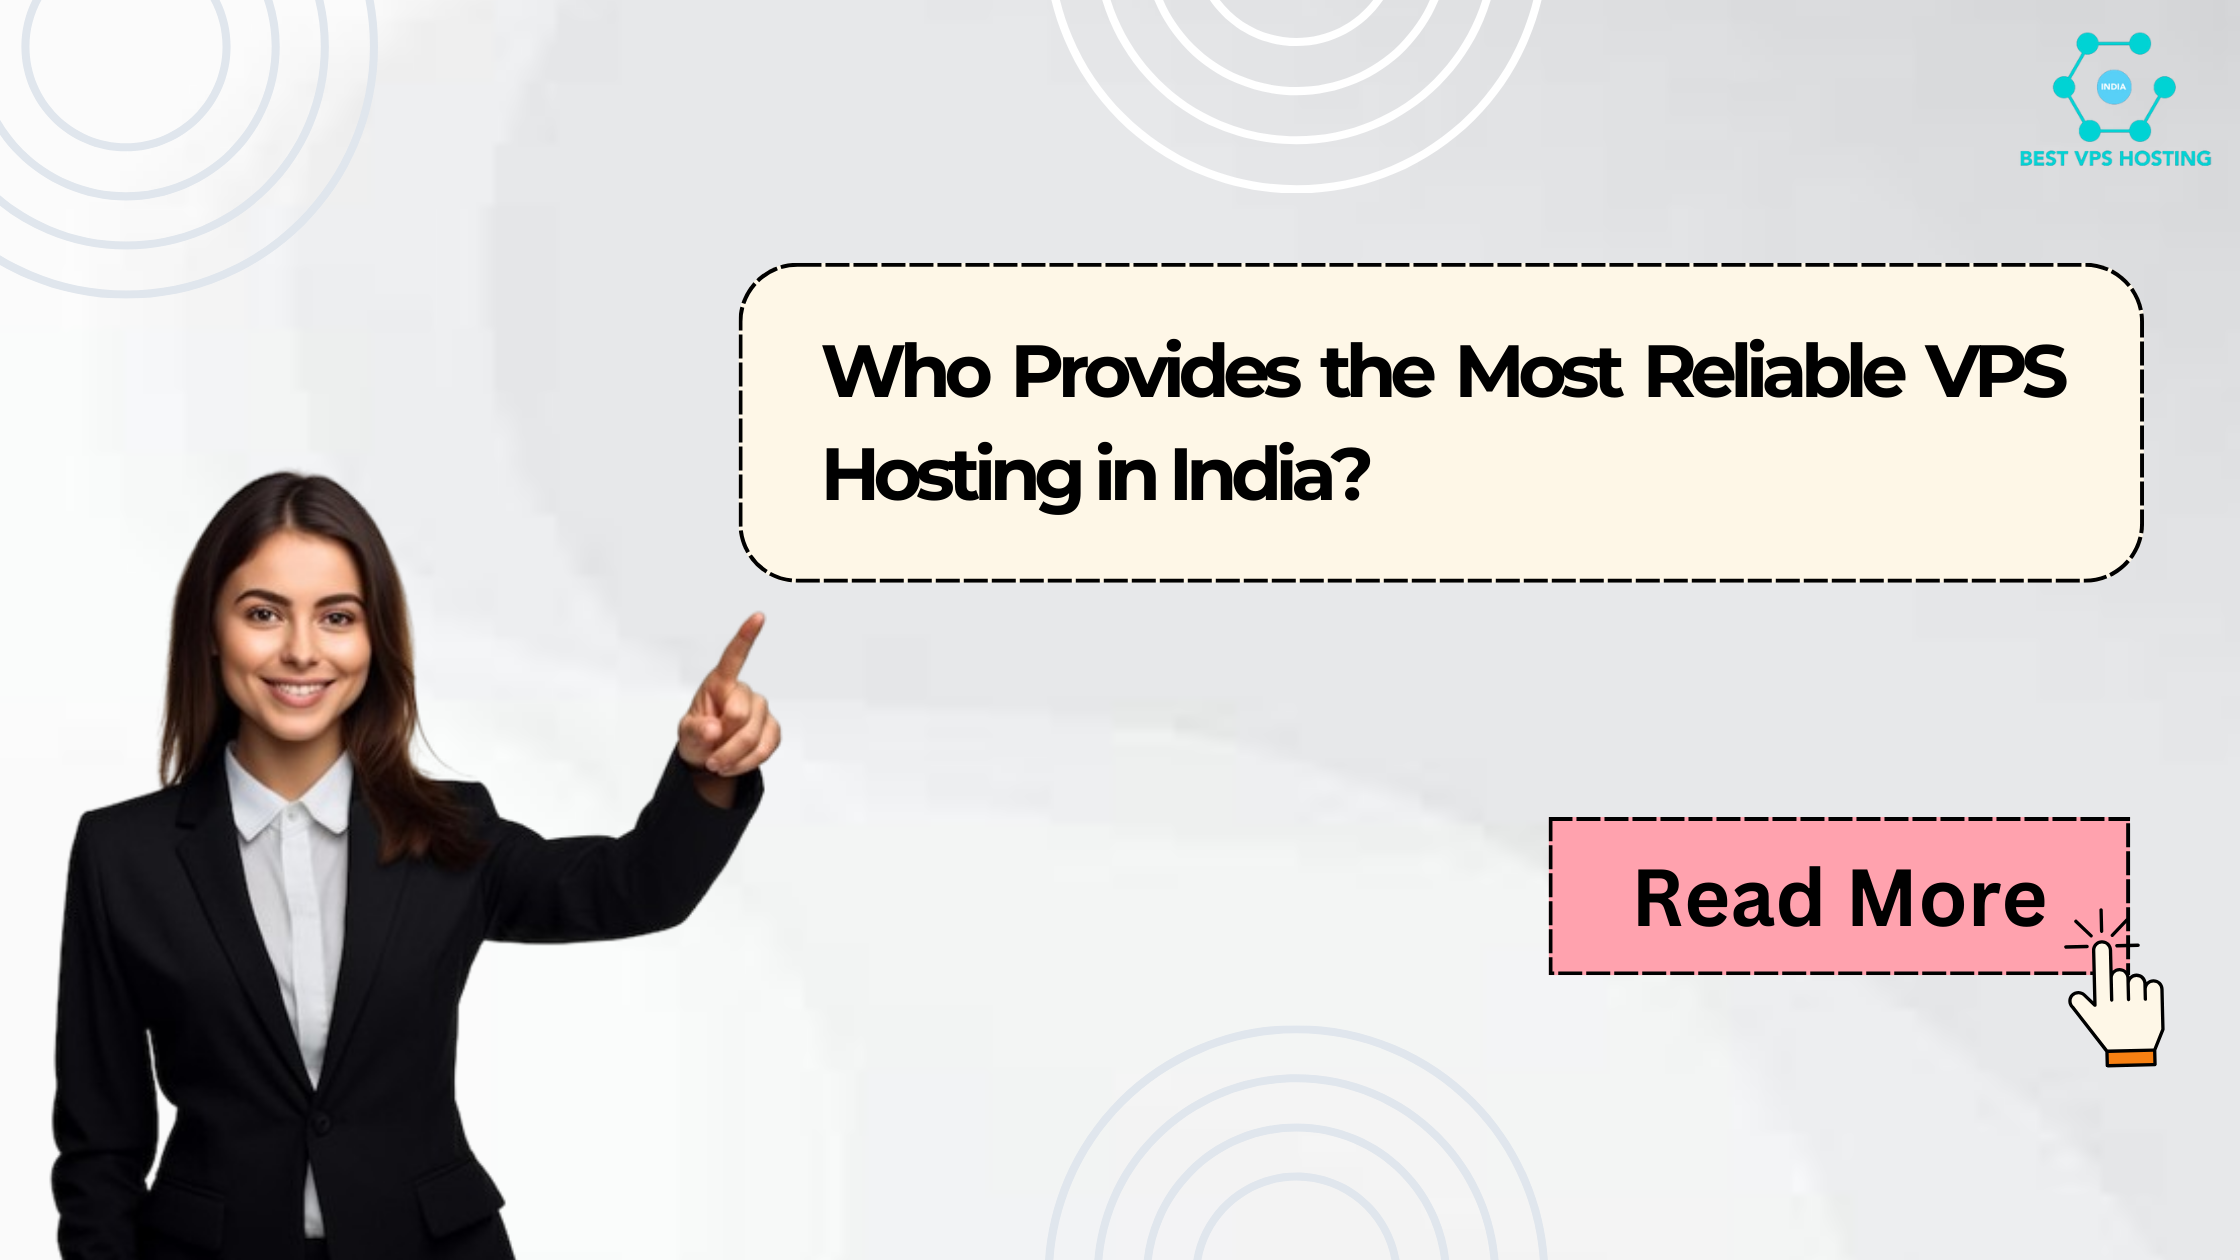 Who Provides the Most Reliable VPS Hosting in India?